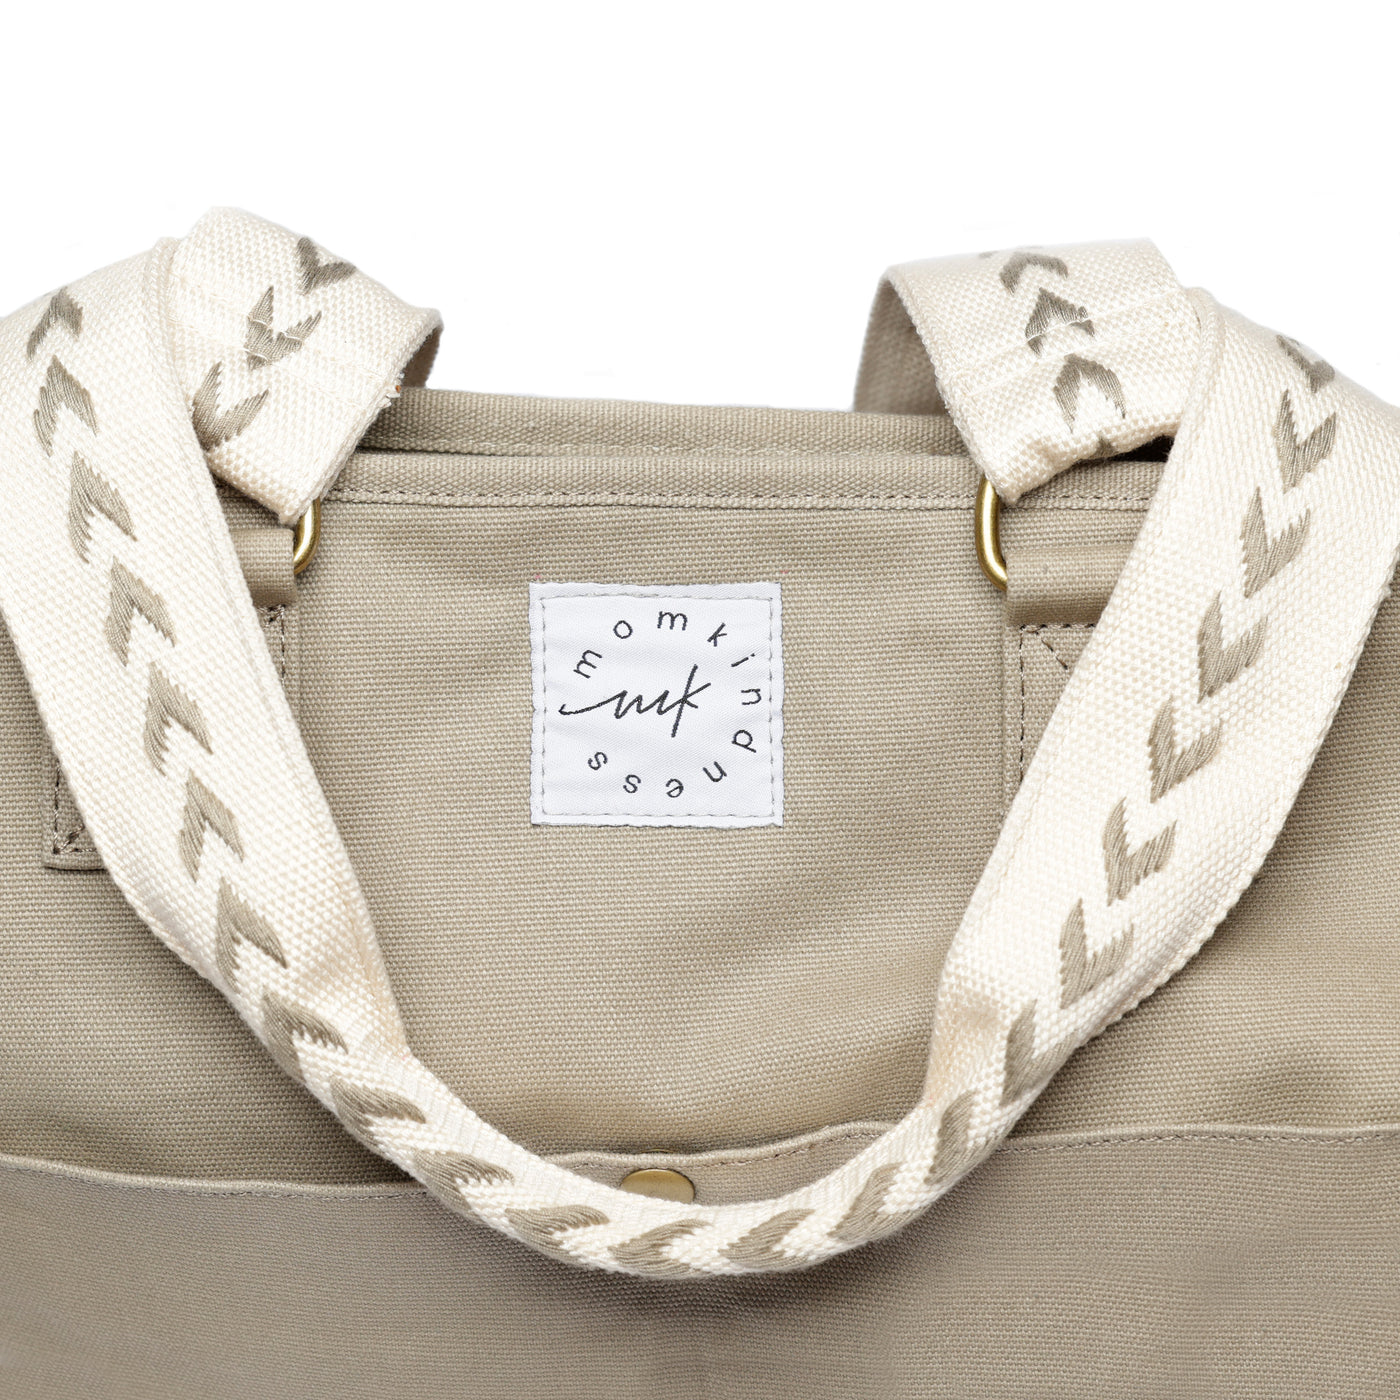 A close-up of the arrow pattern embroidered beige shoulder straps on a tan colored canvas tote and showing the Momkindness logo patch.